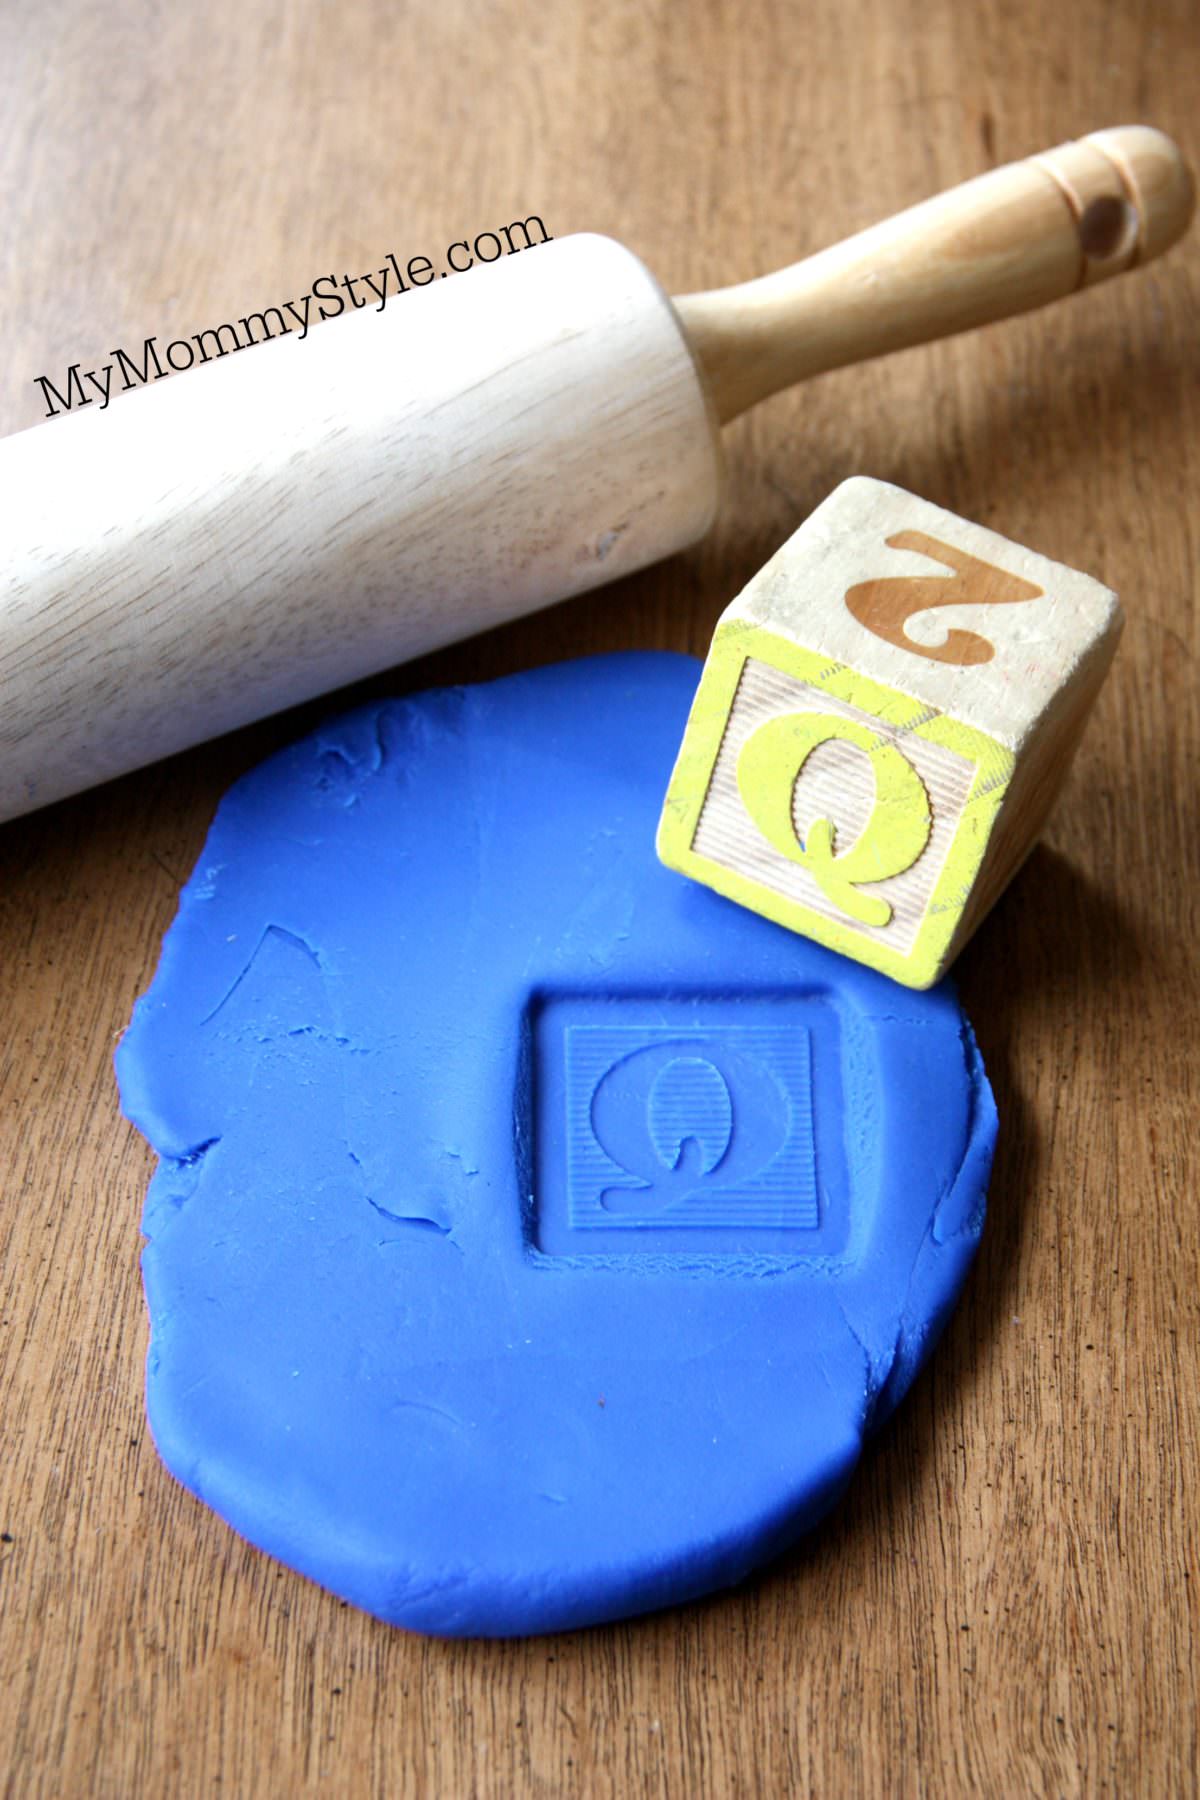 https://www.mymommystyle.com/wp-content/uploads/2015/07/02-12373-post/play-dough-blocks.jpg